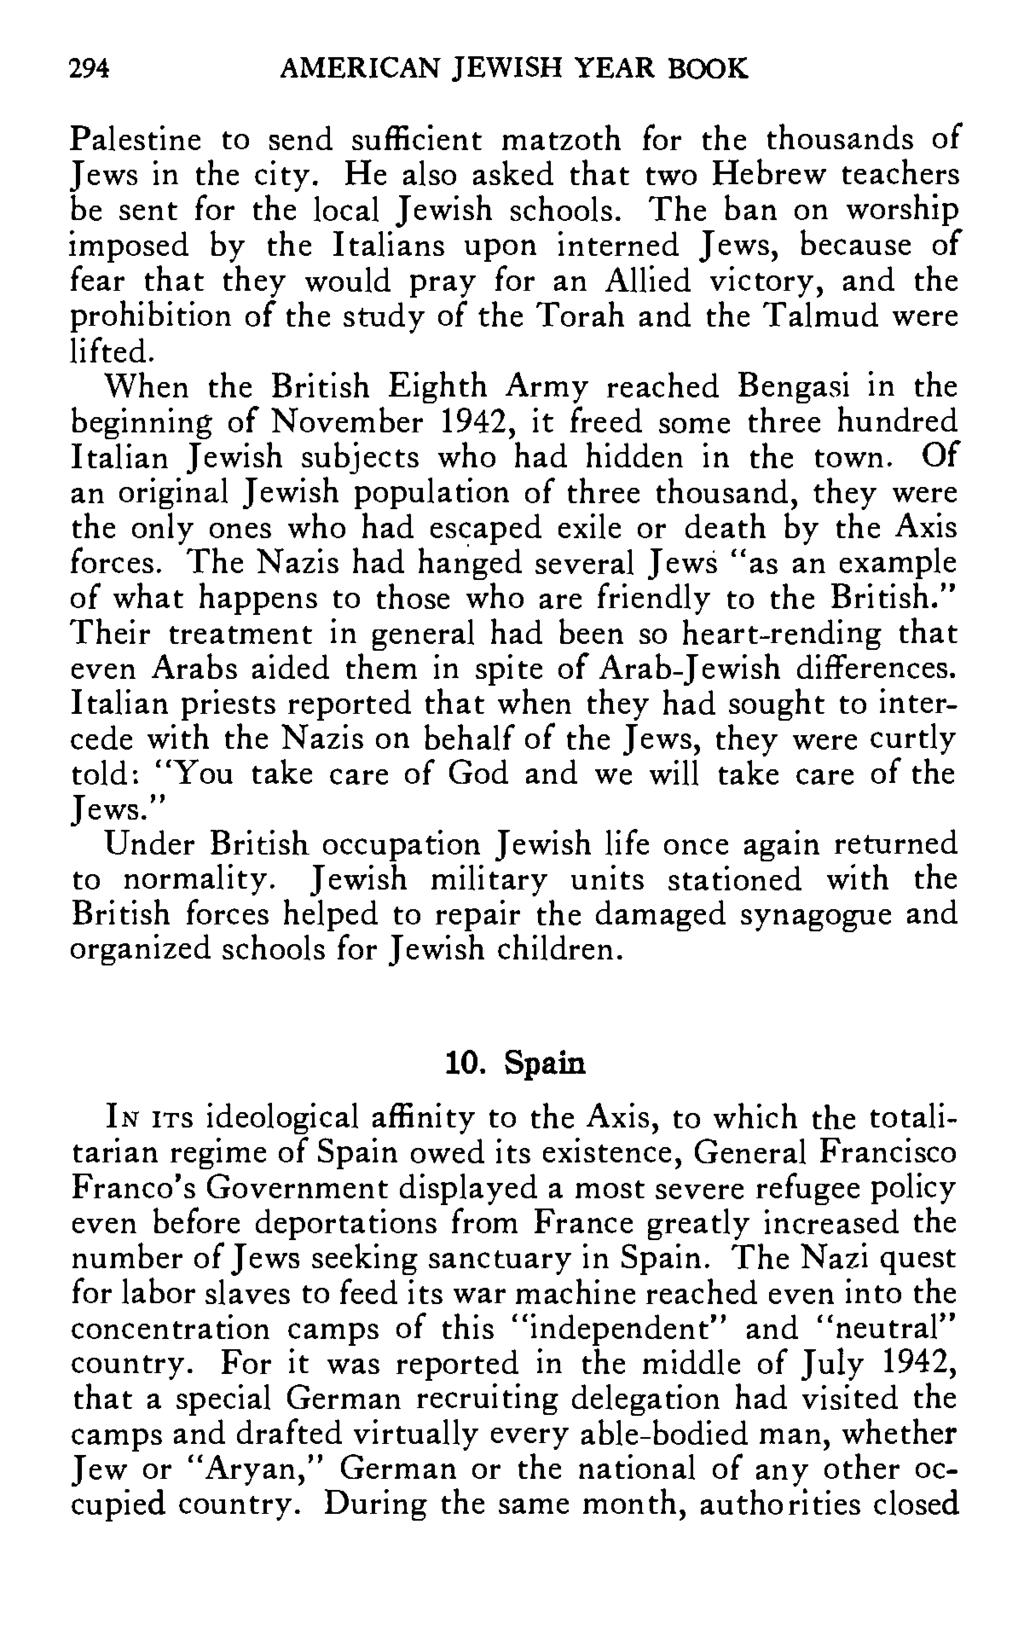 294 AMERICAN JEWISH YEAR BOOK Palestine to send sufficient matzoth for the thousands of Jews in the city. He also asked that two Hebrew teachers be sent for the local Jewish schools.